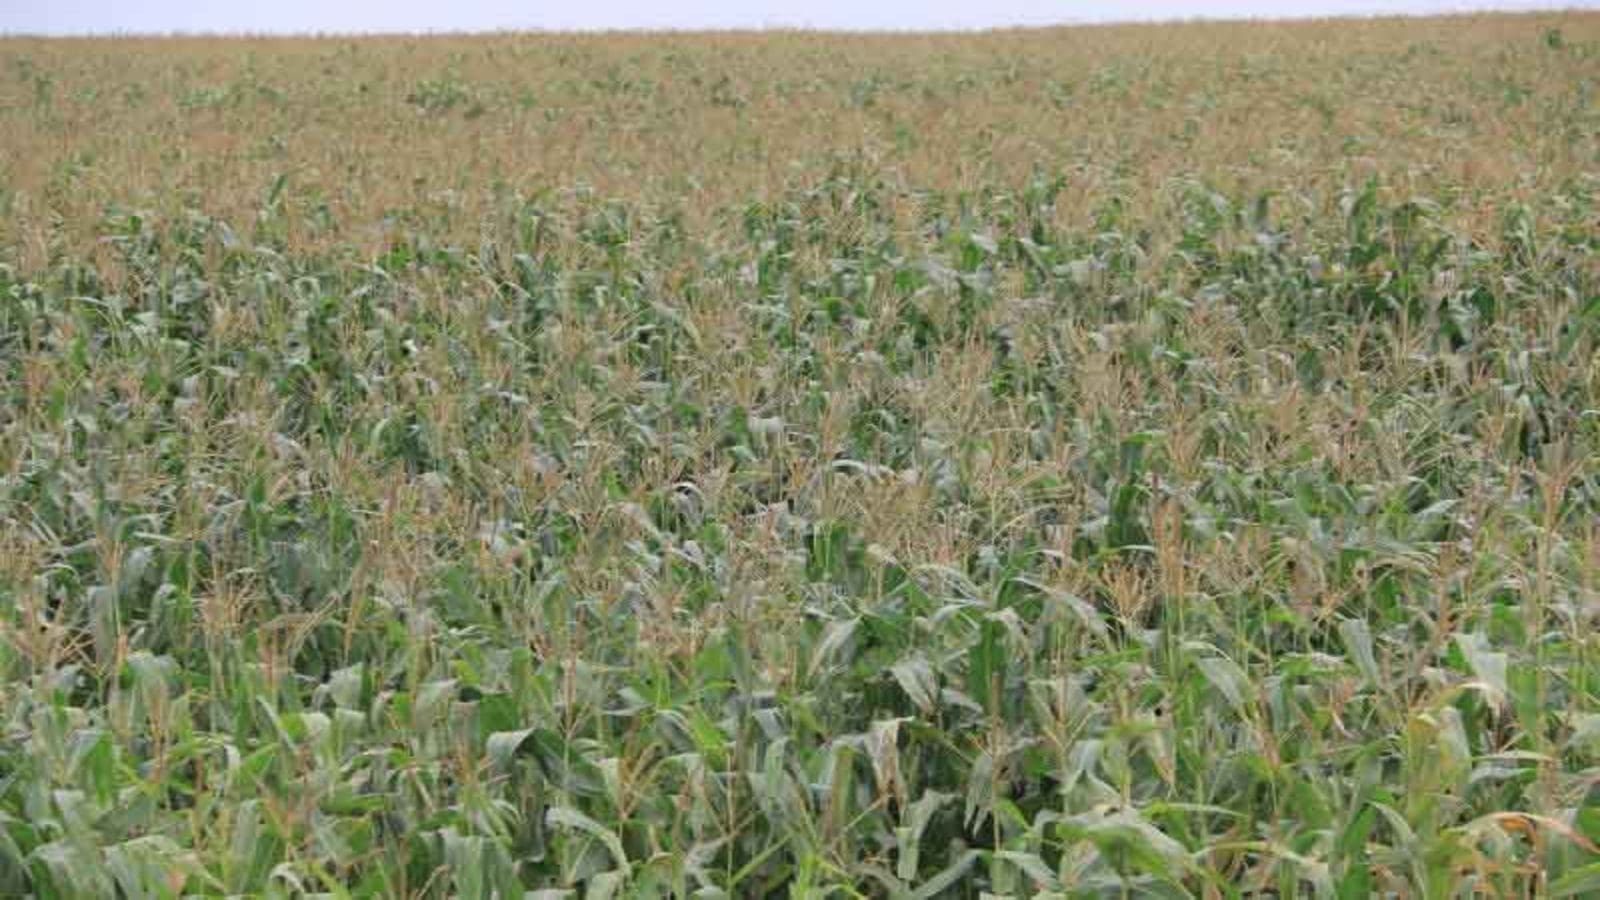 Kenya to cultivate maize crops on 500,000 acres of idle public land